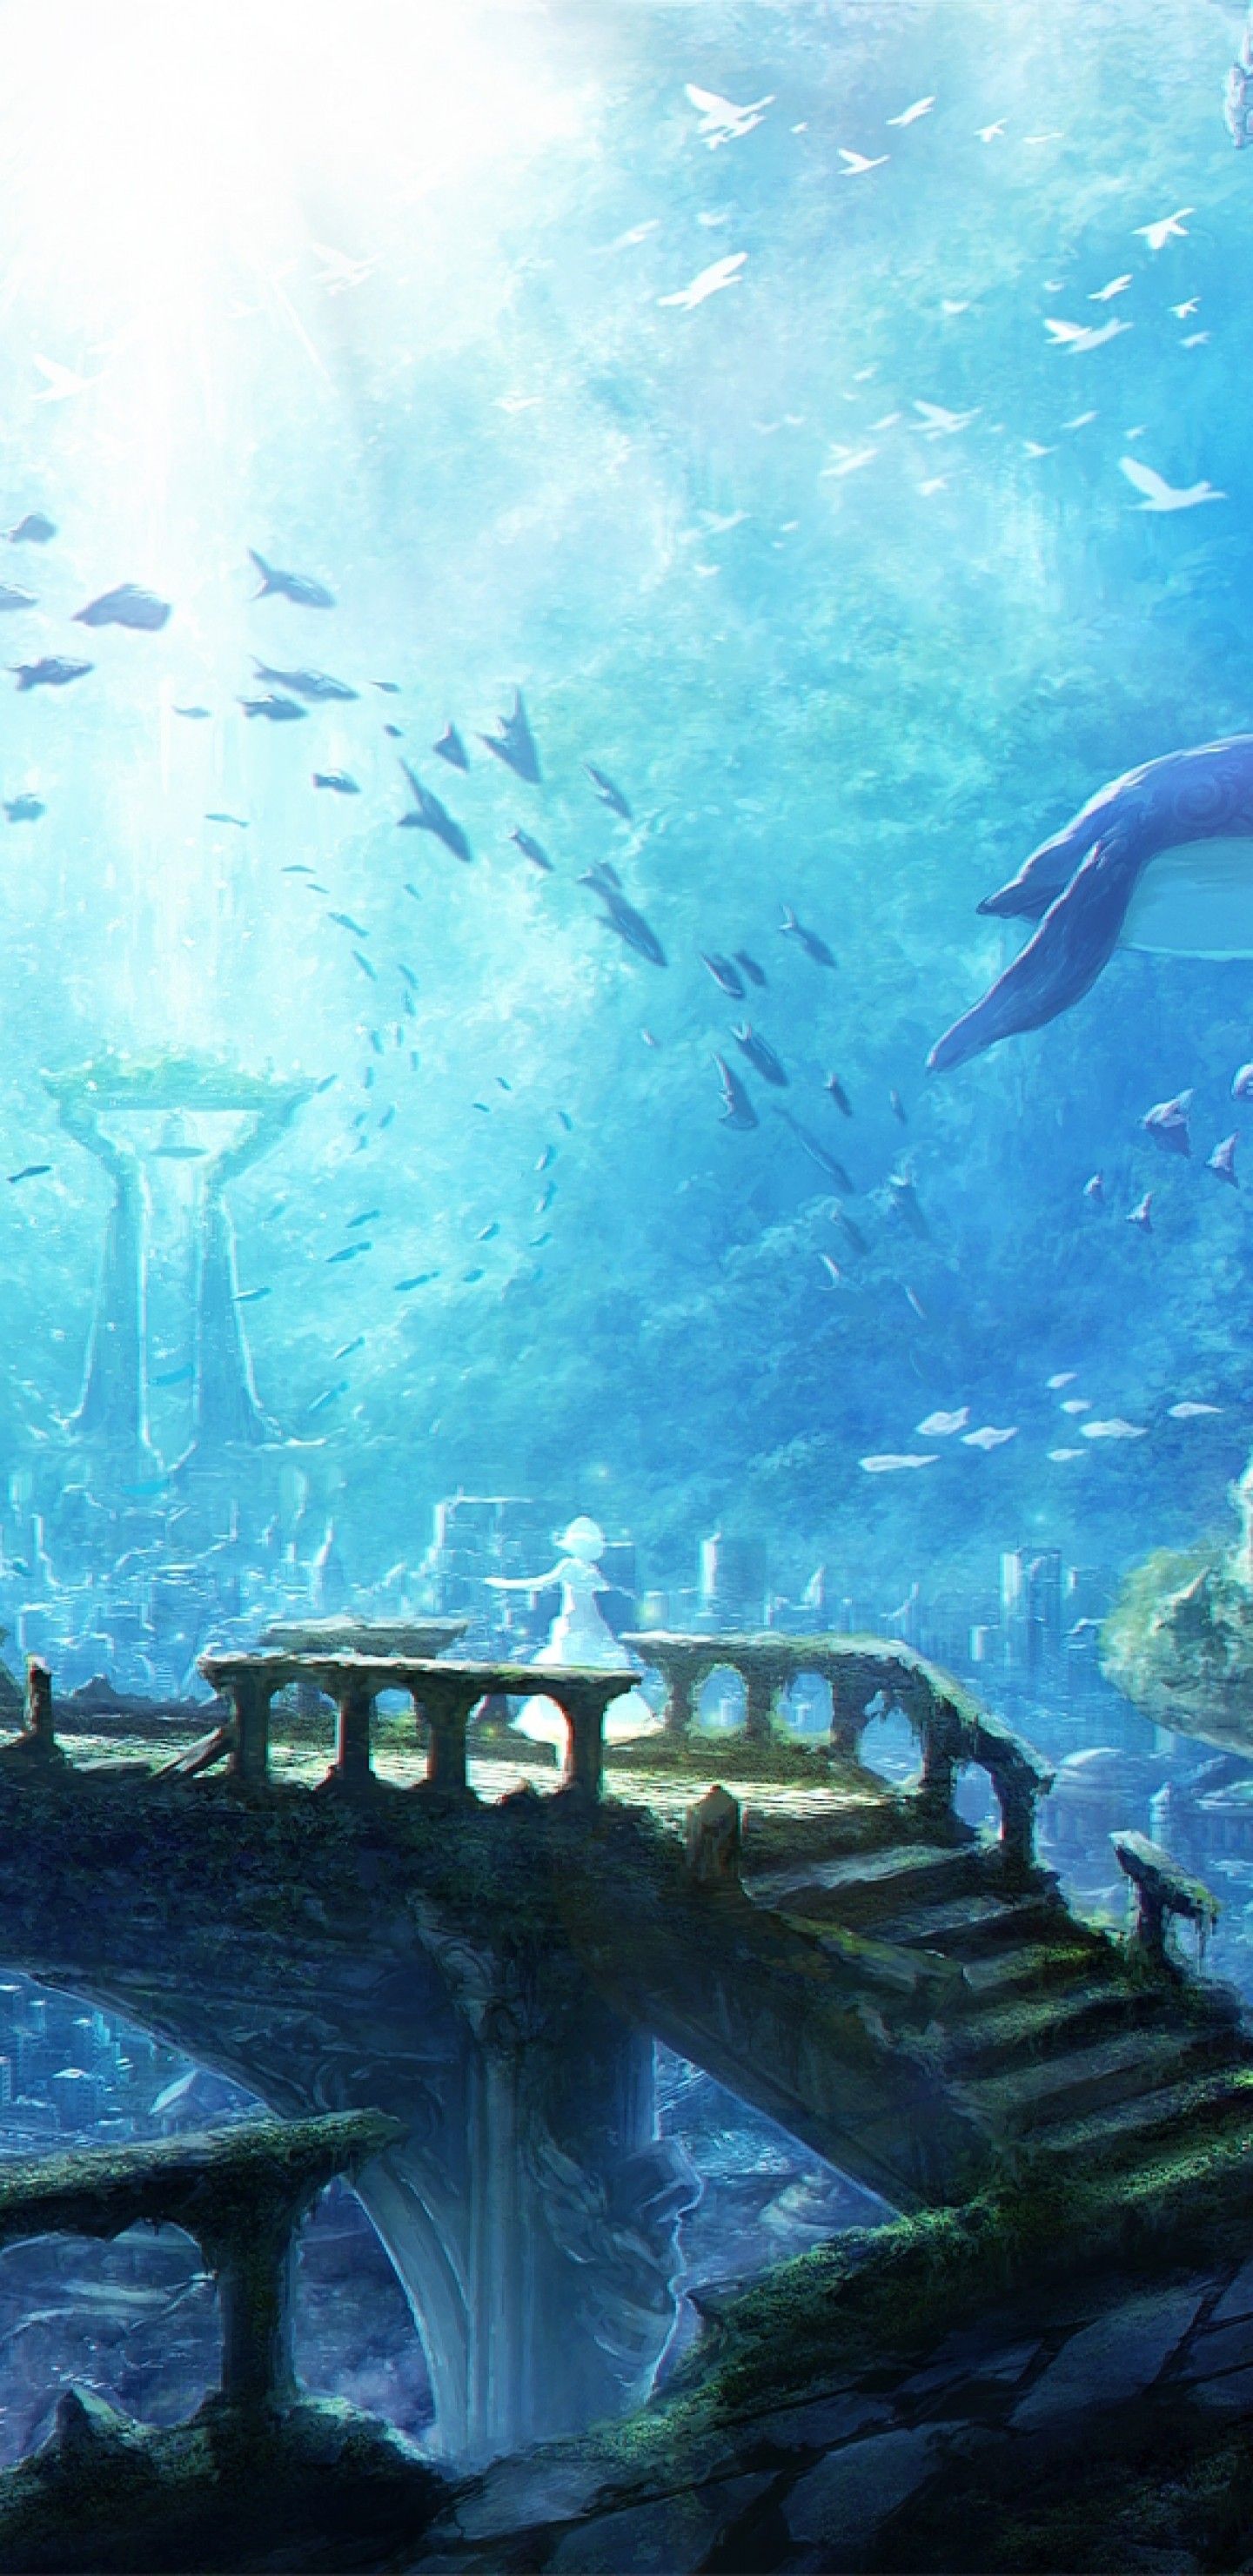 Download 1440x2960 Underwater City, Ruins, Fishes Wallpaper for Samsung Galaxy S Note S S8+, Google Pixel 3 XL